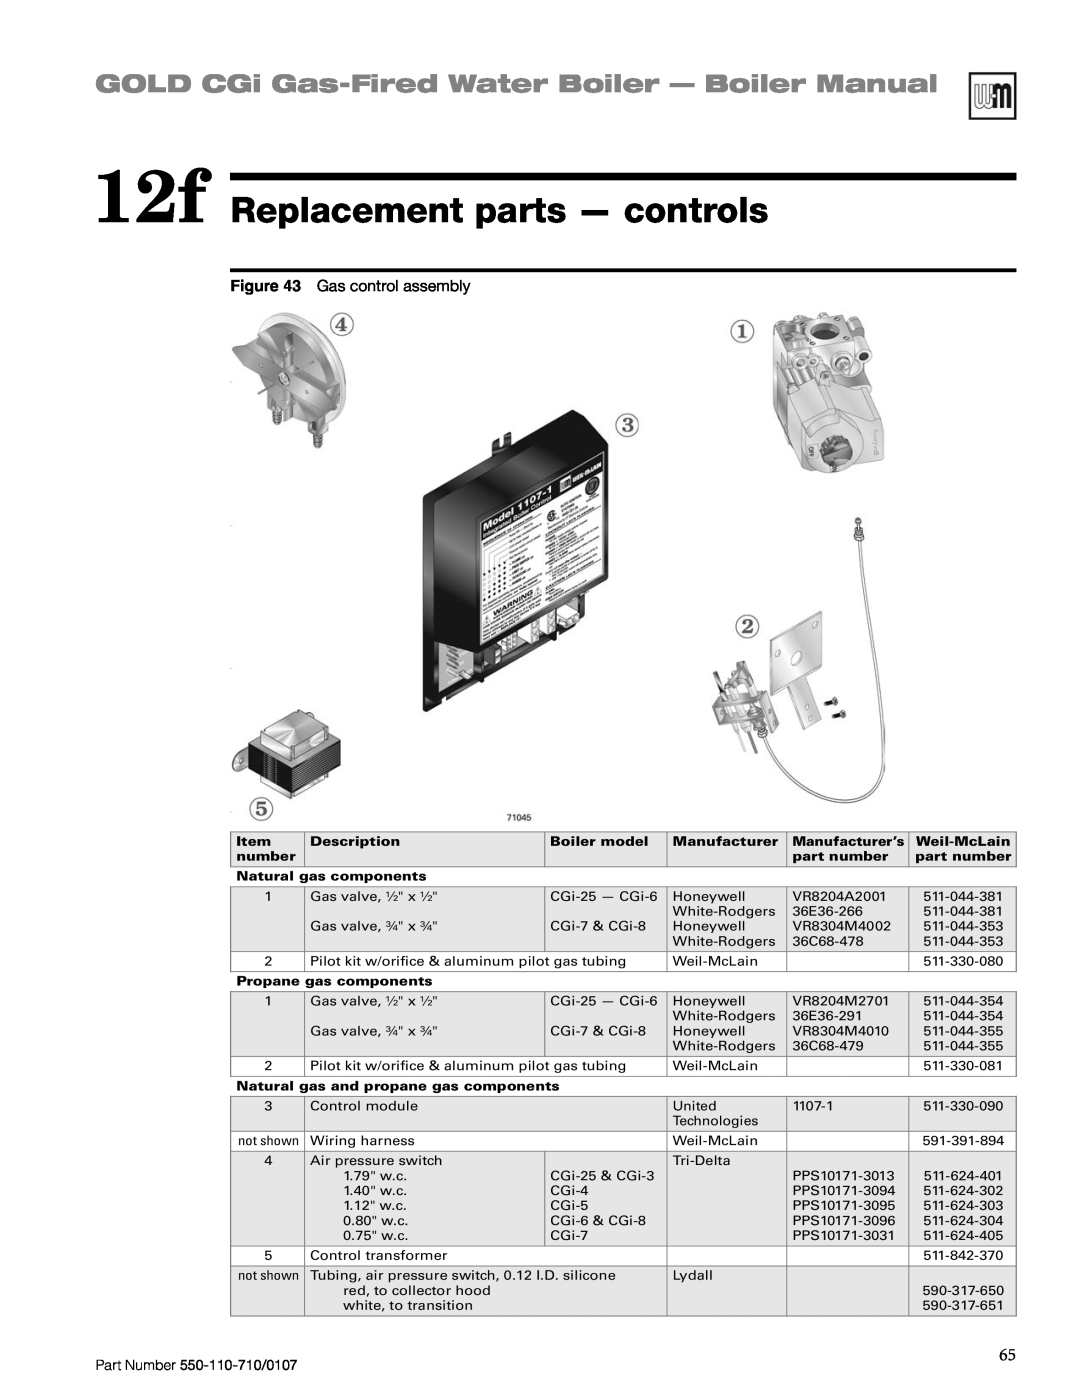 Weil-McLain Series 2 manual 12f Replacement parts — controls, GOLD CGi Gas-FiredWater Boiler - Boiler Manual 